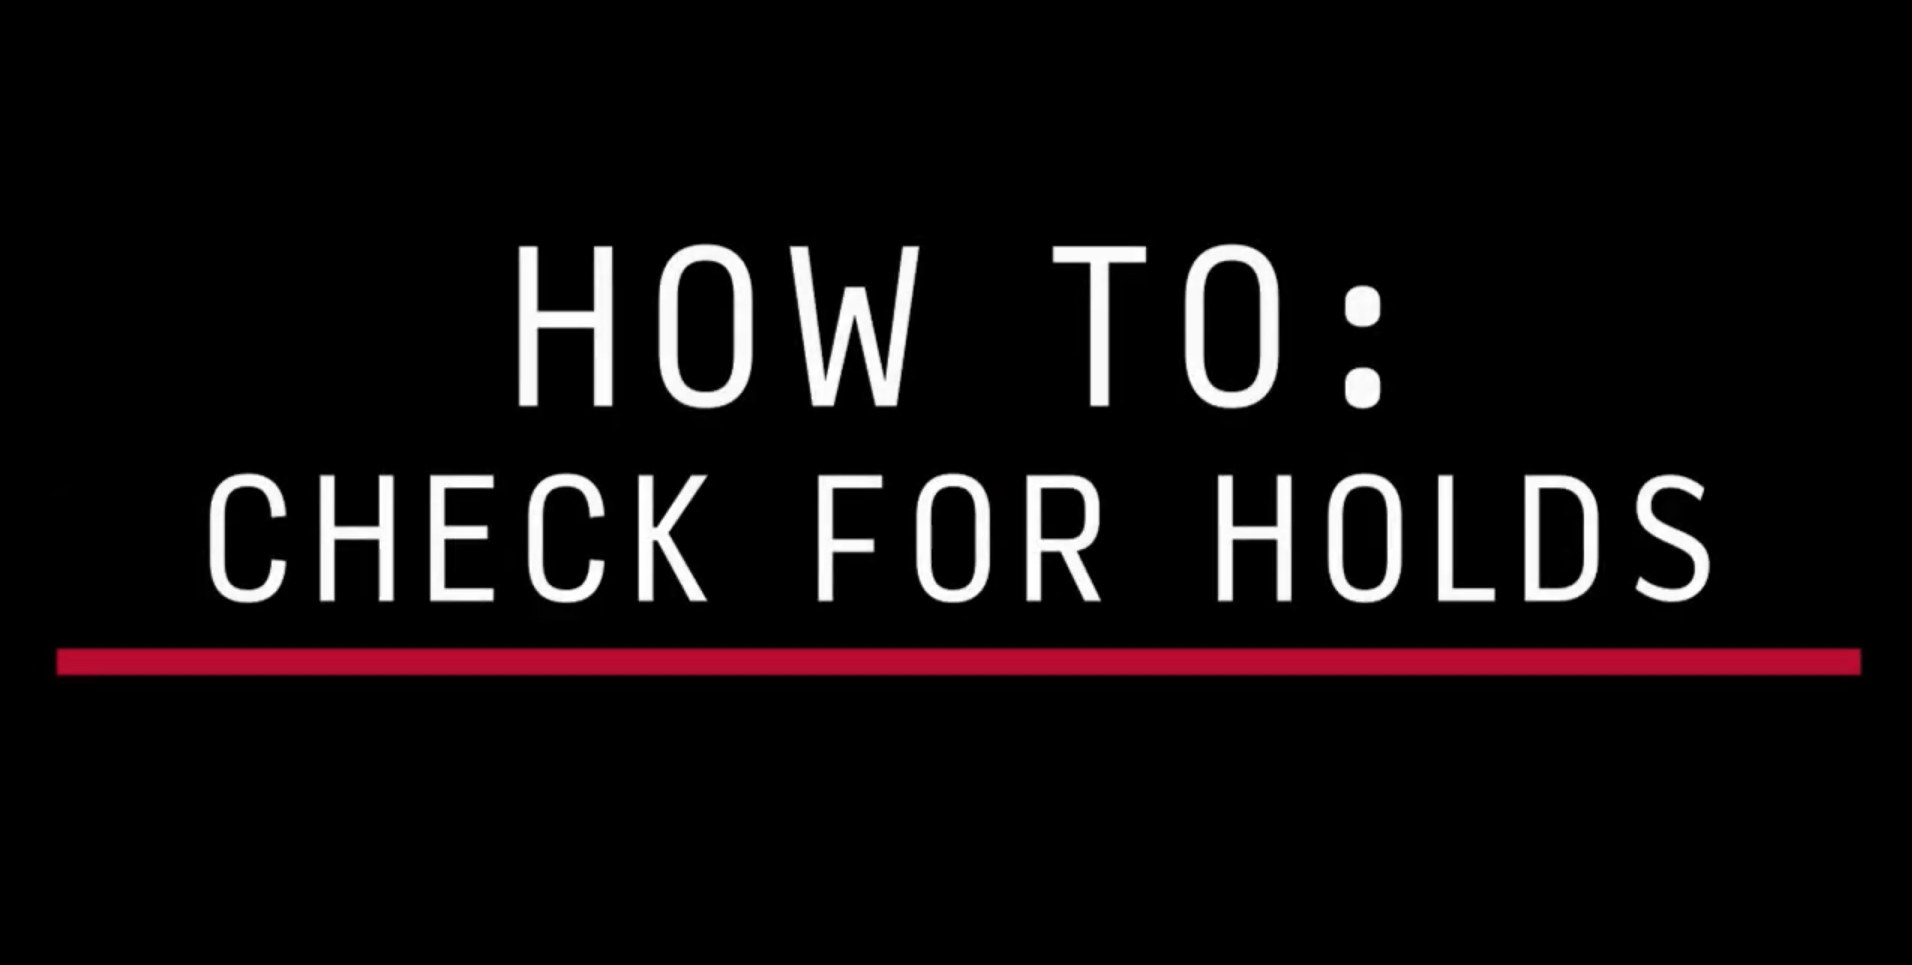 How to check for holds